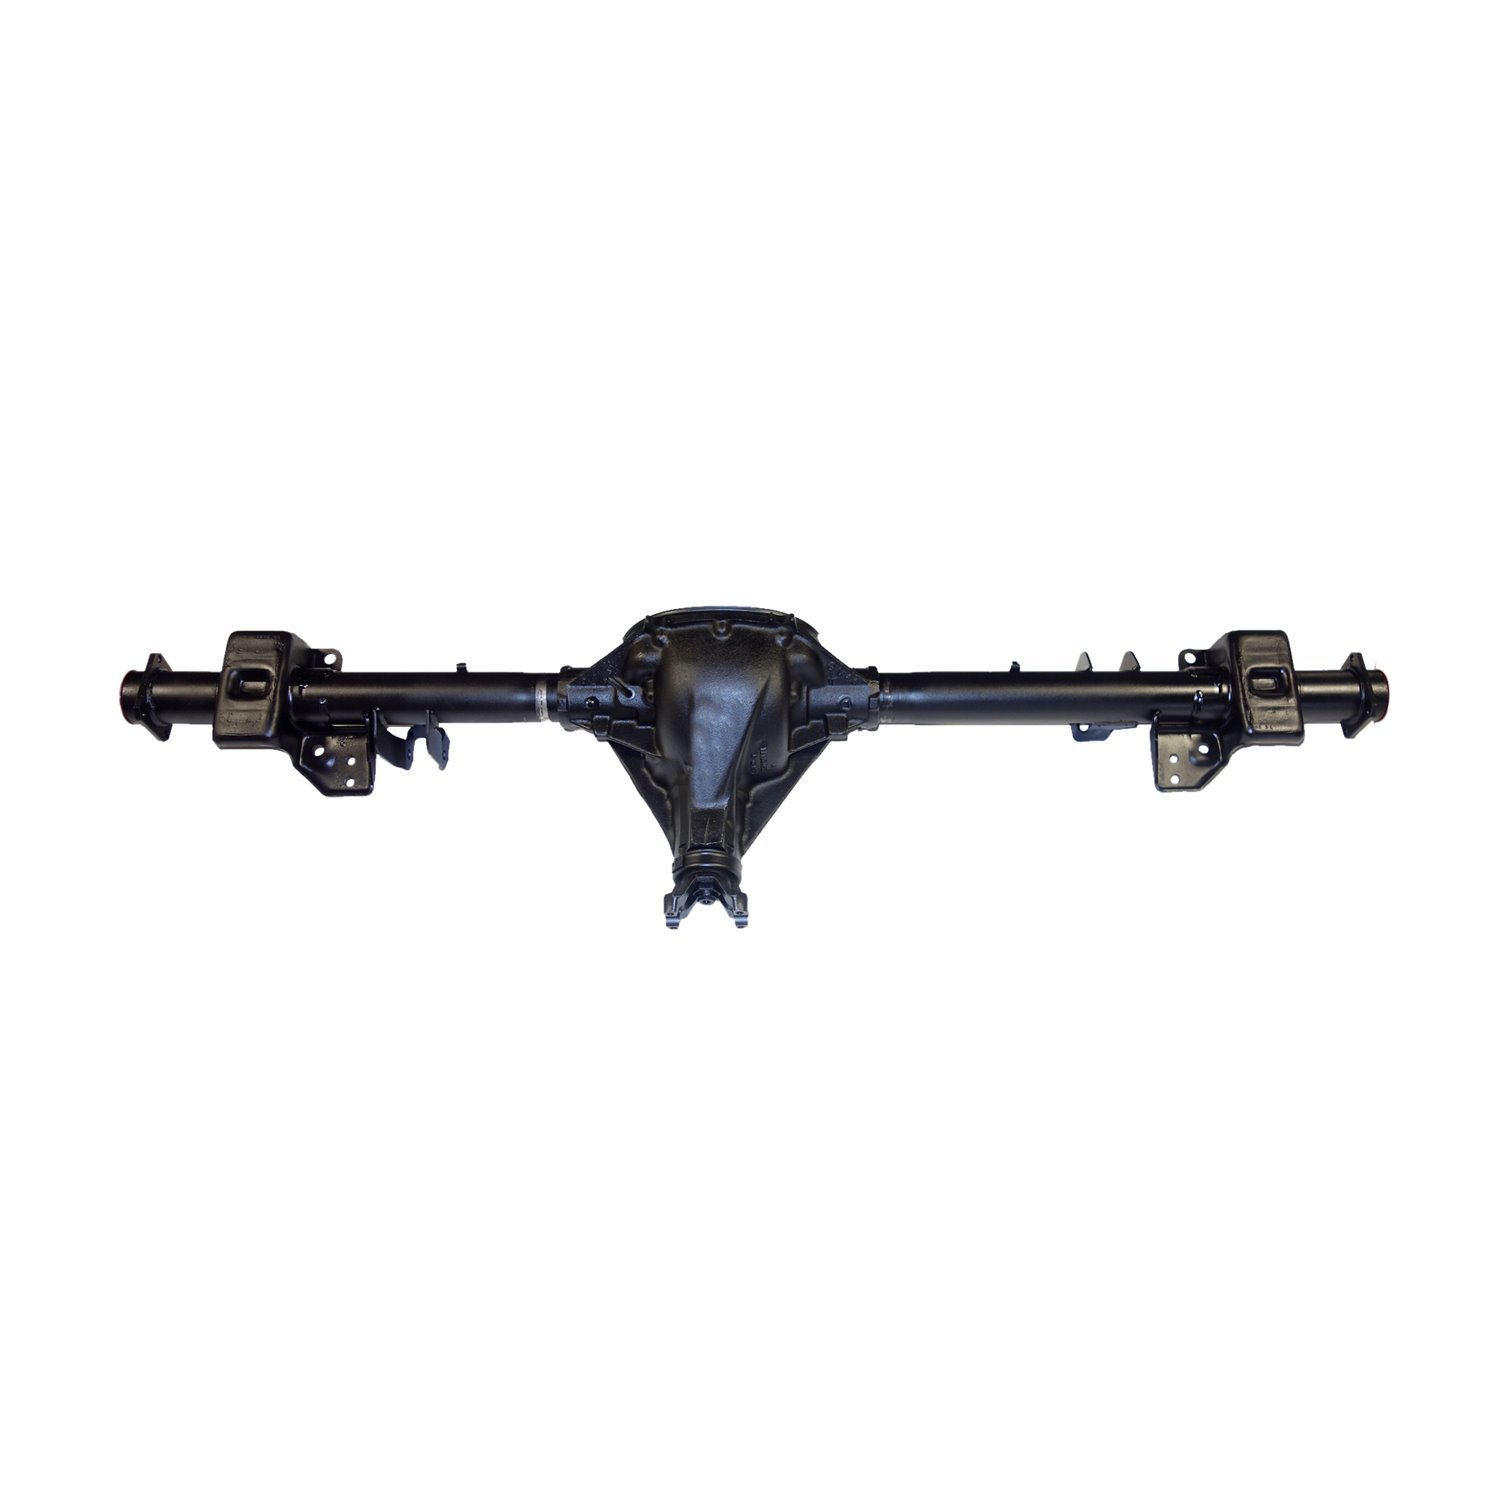 Remanufactured Complete Axle Assembly for GM 7.5" 85-95 GMC Astro & Safari Van 3.42 Ratio